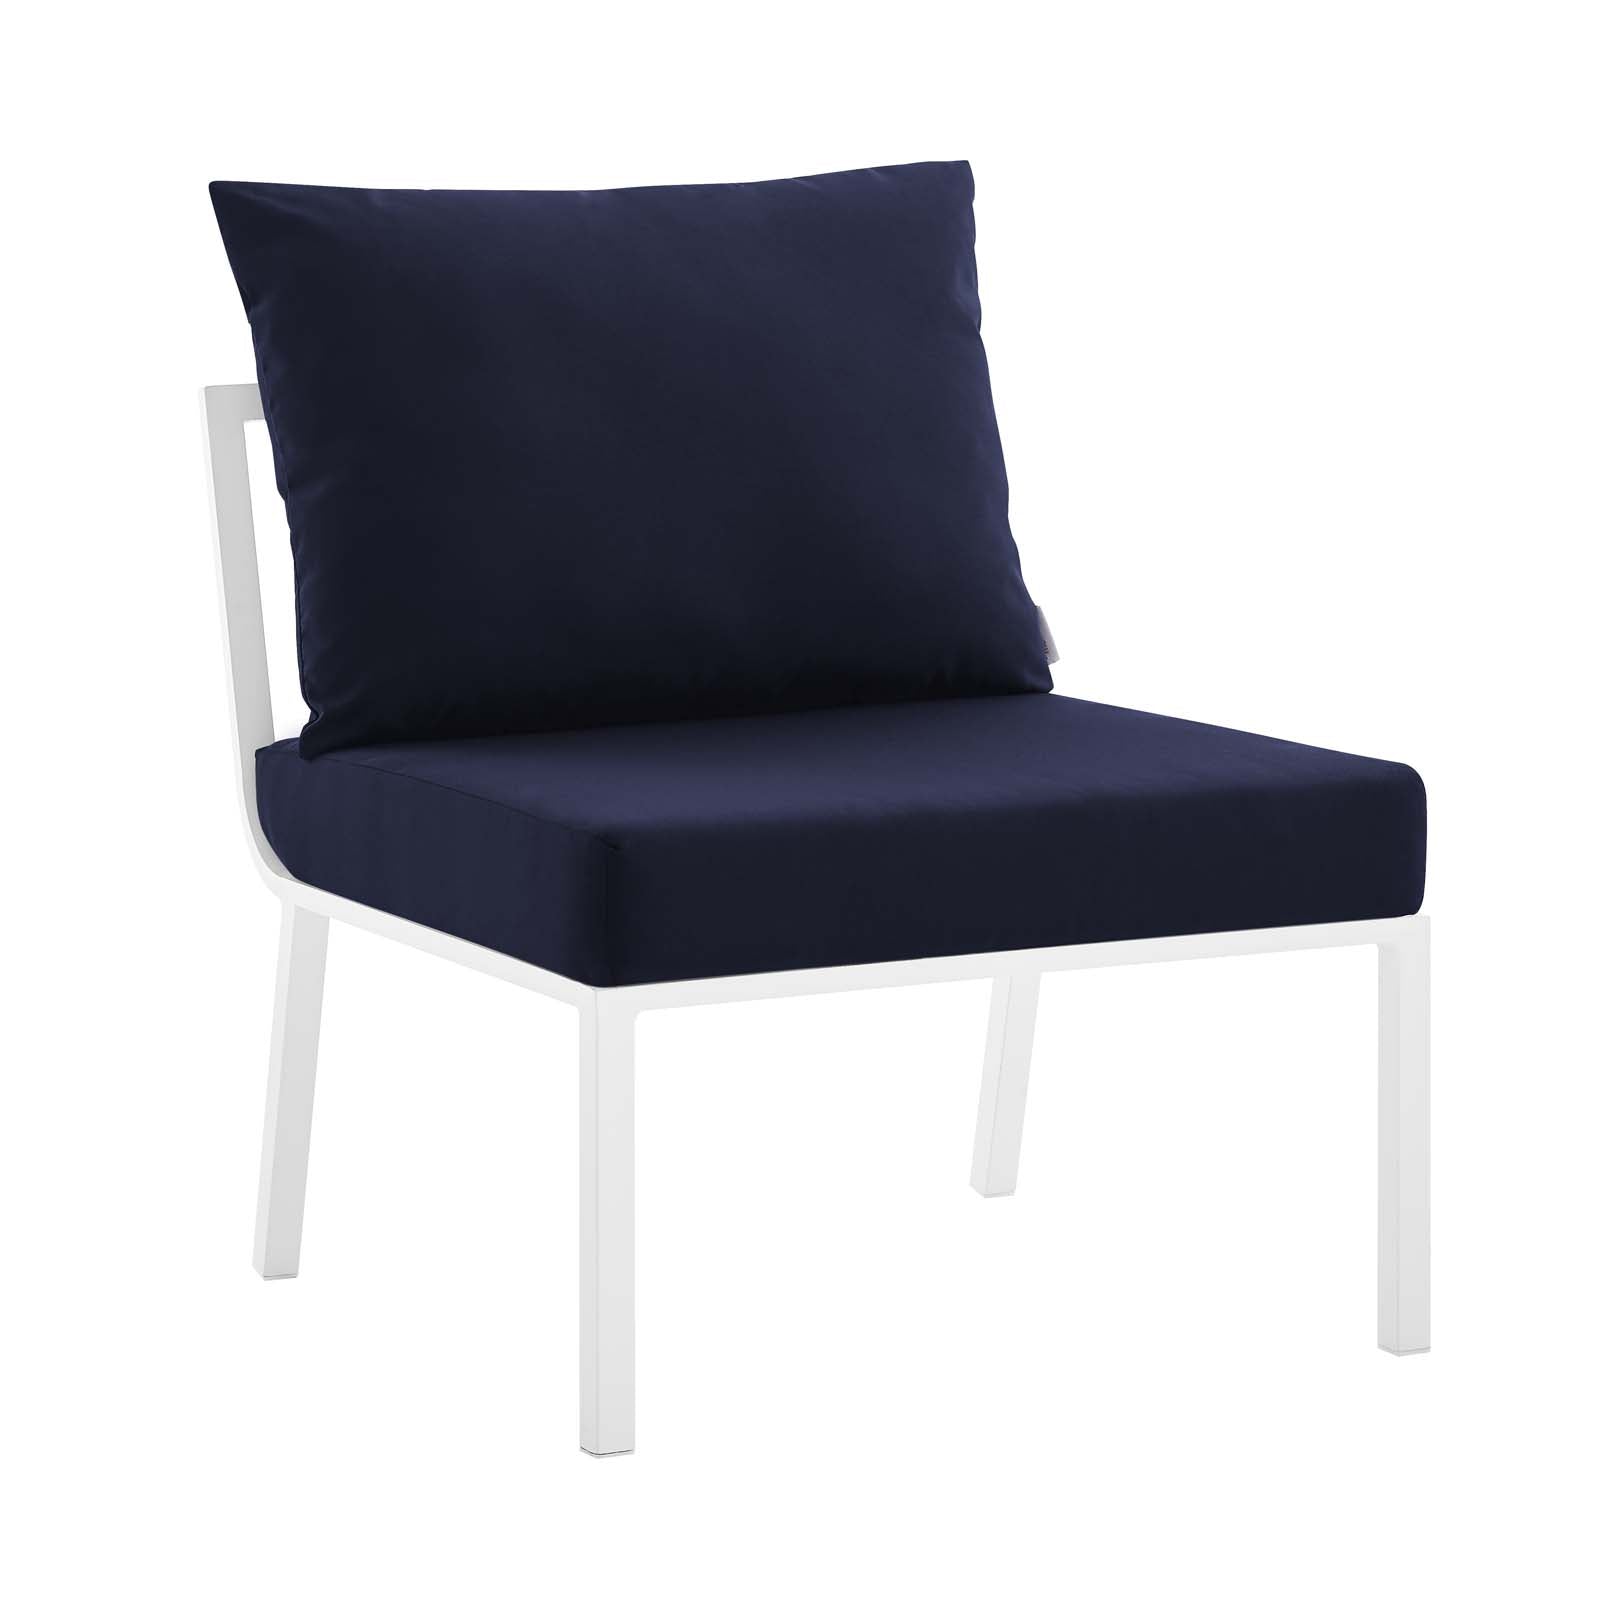 Modway Outdoor Chairs - Riverside Outdoor Patio Aluminum Armless Chair White Navy